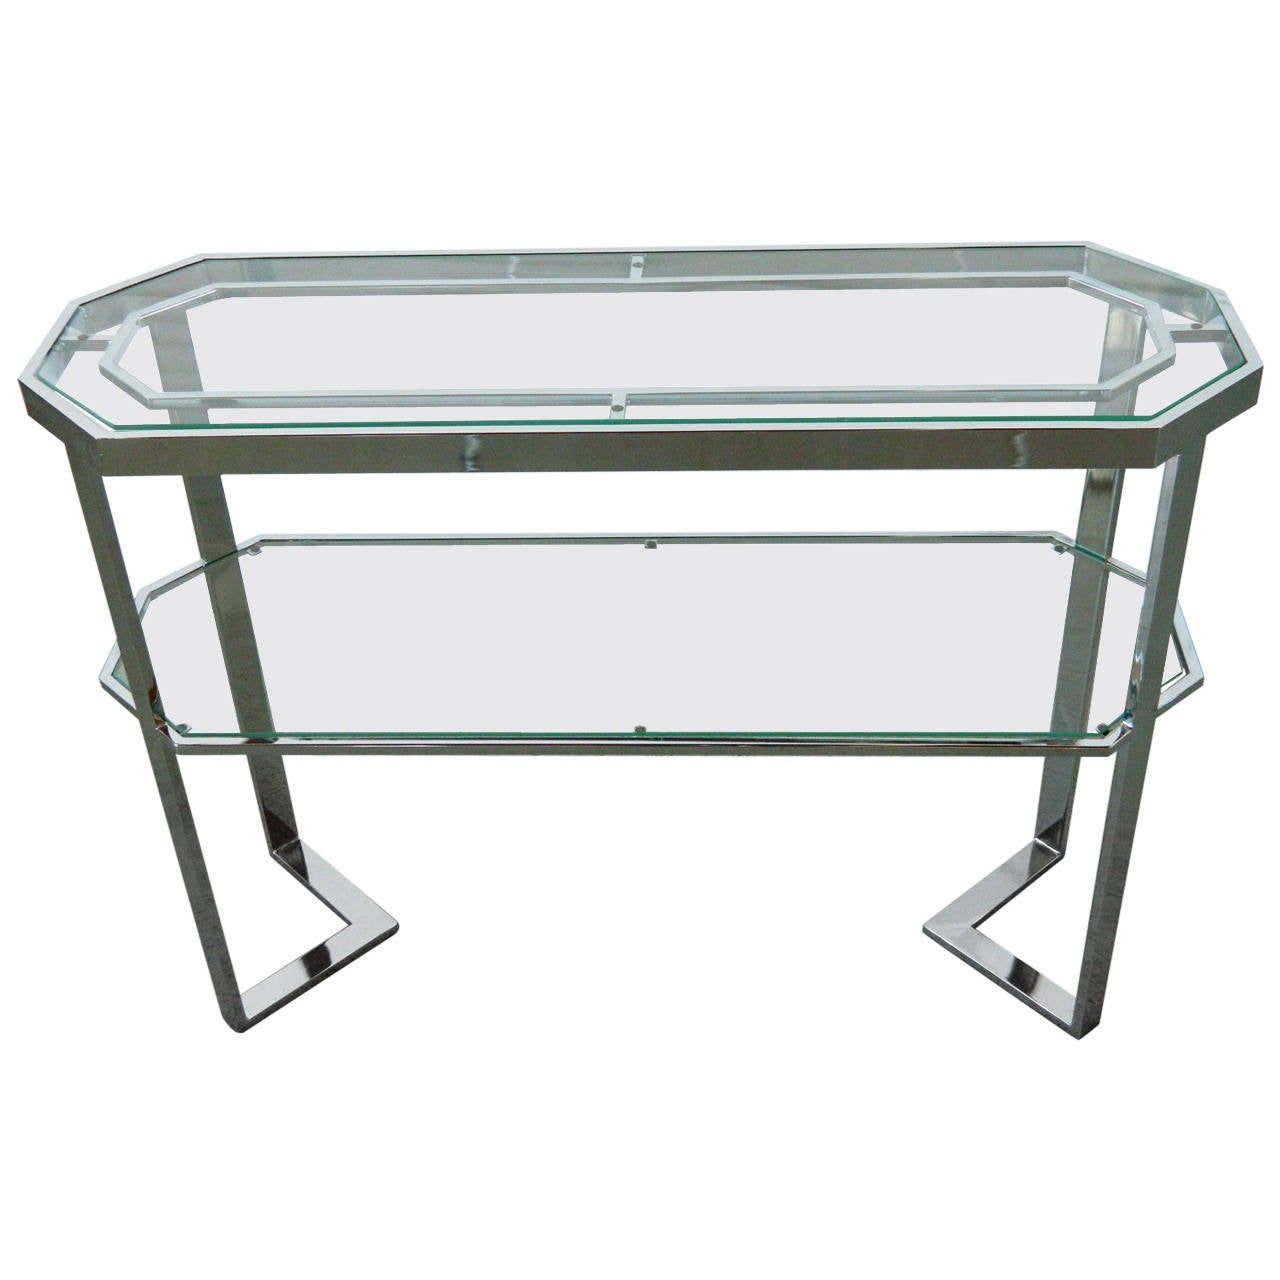 Chrome And Glass Console Table At 1stdibs Within Glass And Chrome Console Tables (View 16 of 20)